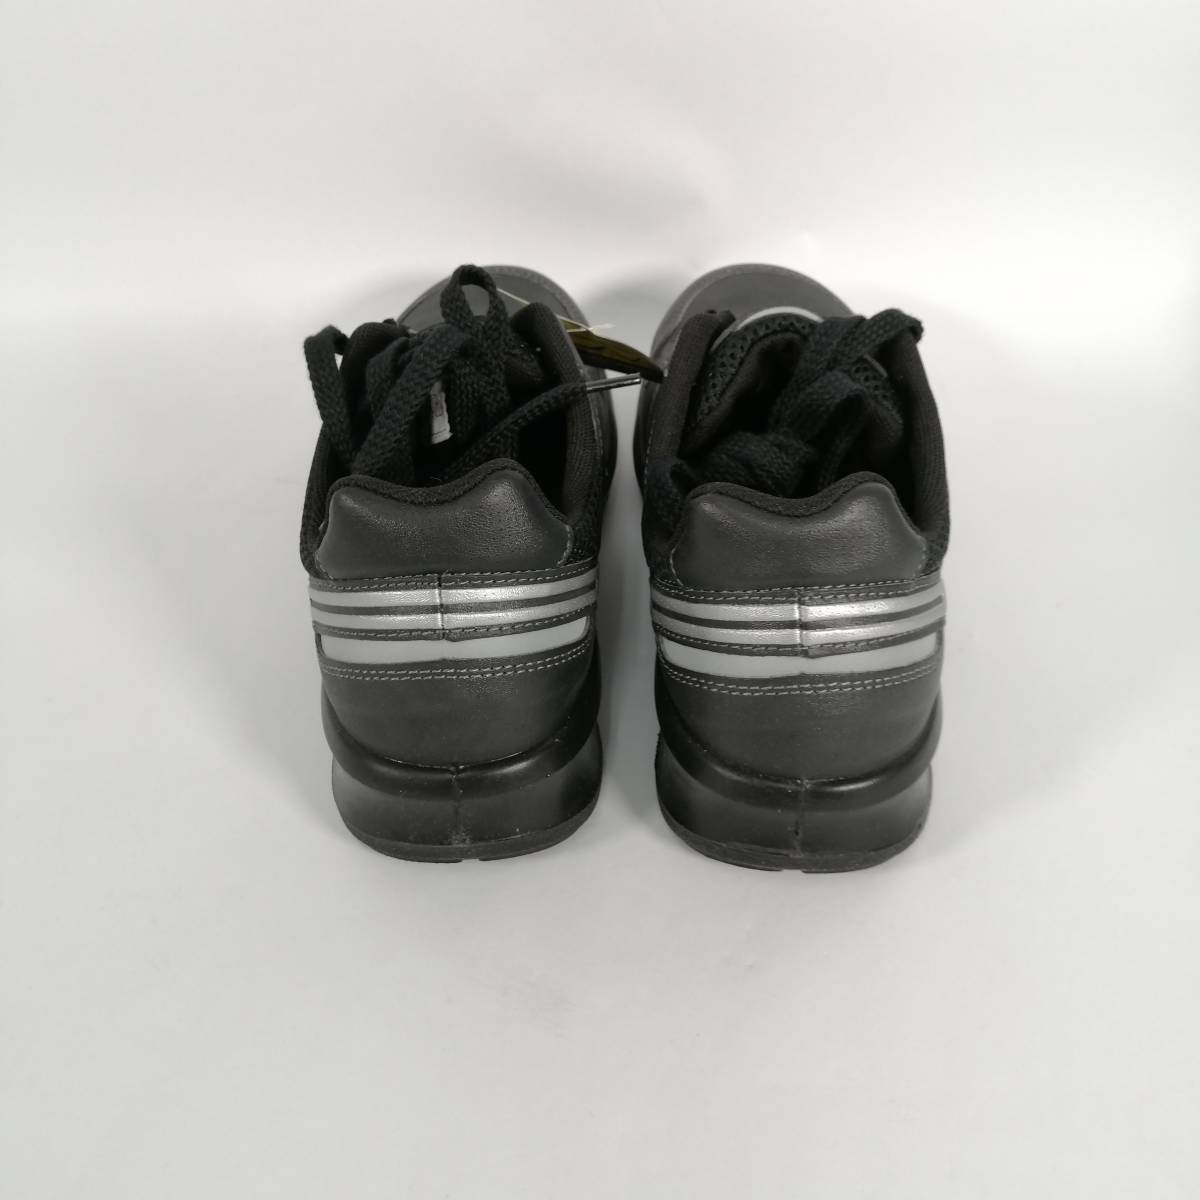  unused green safety sneakers type safety shoes safety sneakers black black 24.5.EEE G3690[ outlet ] 22 00076